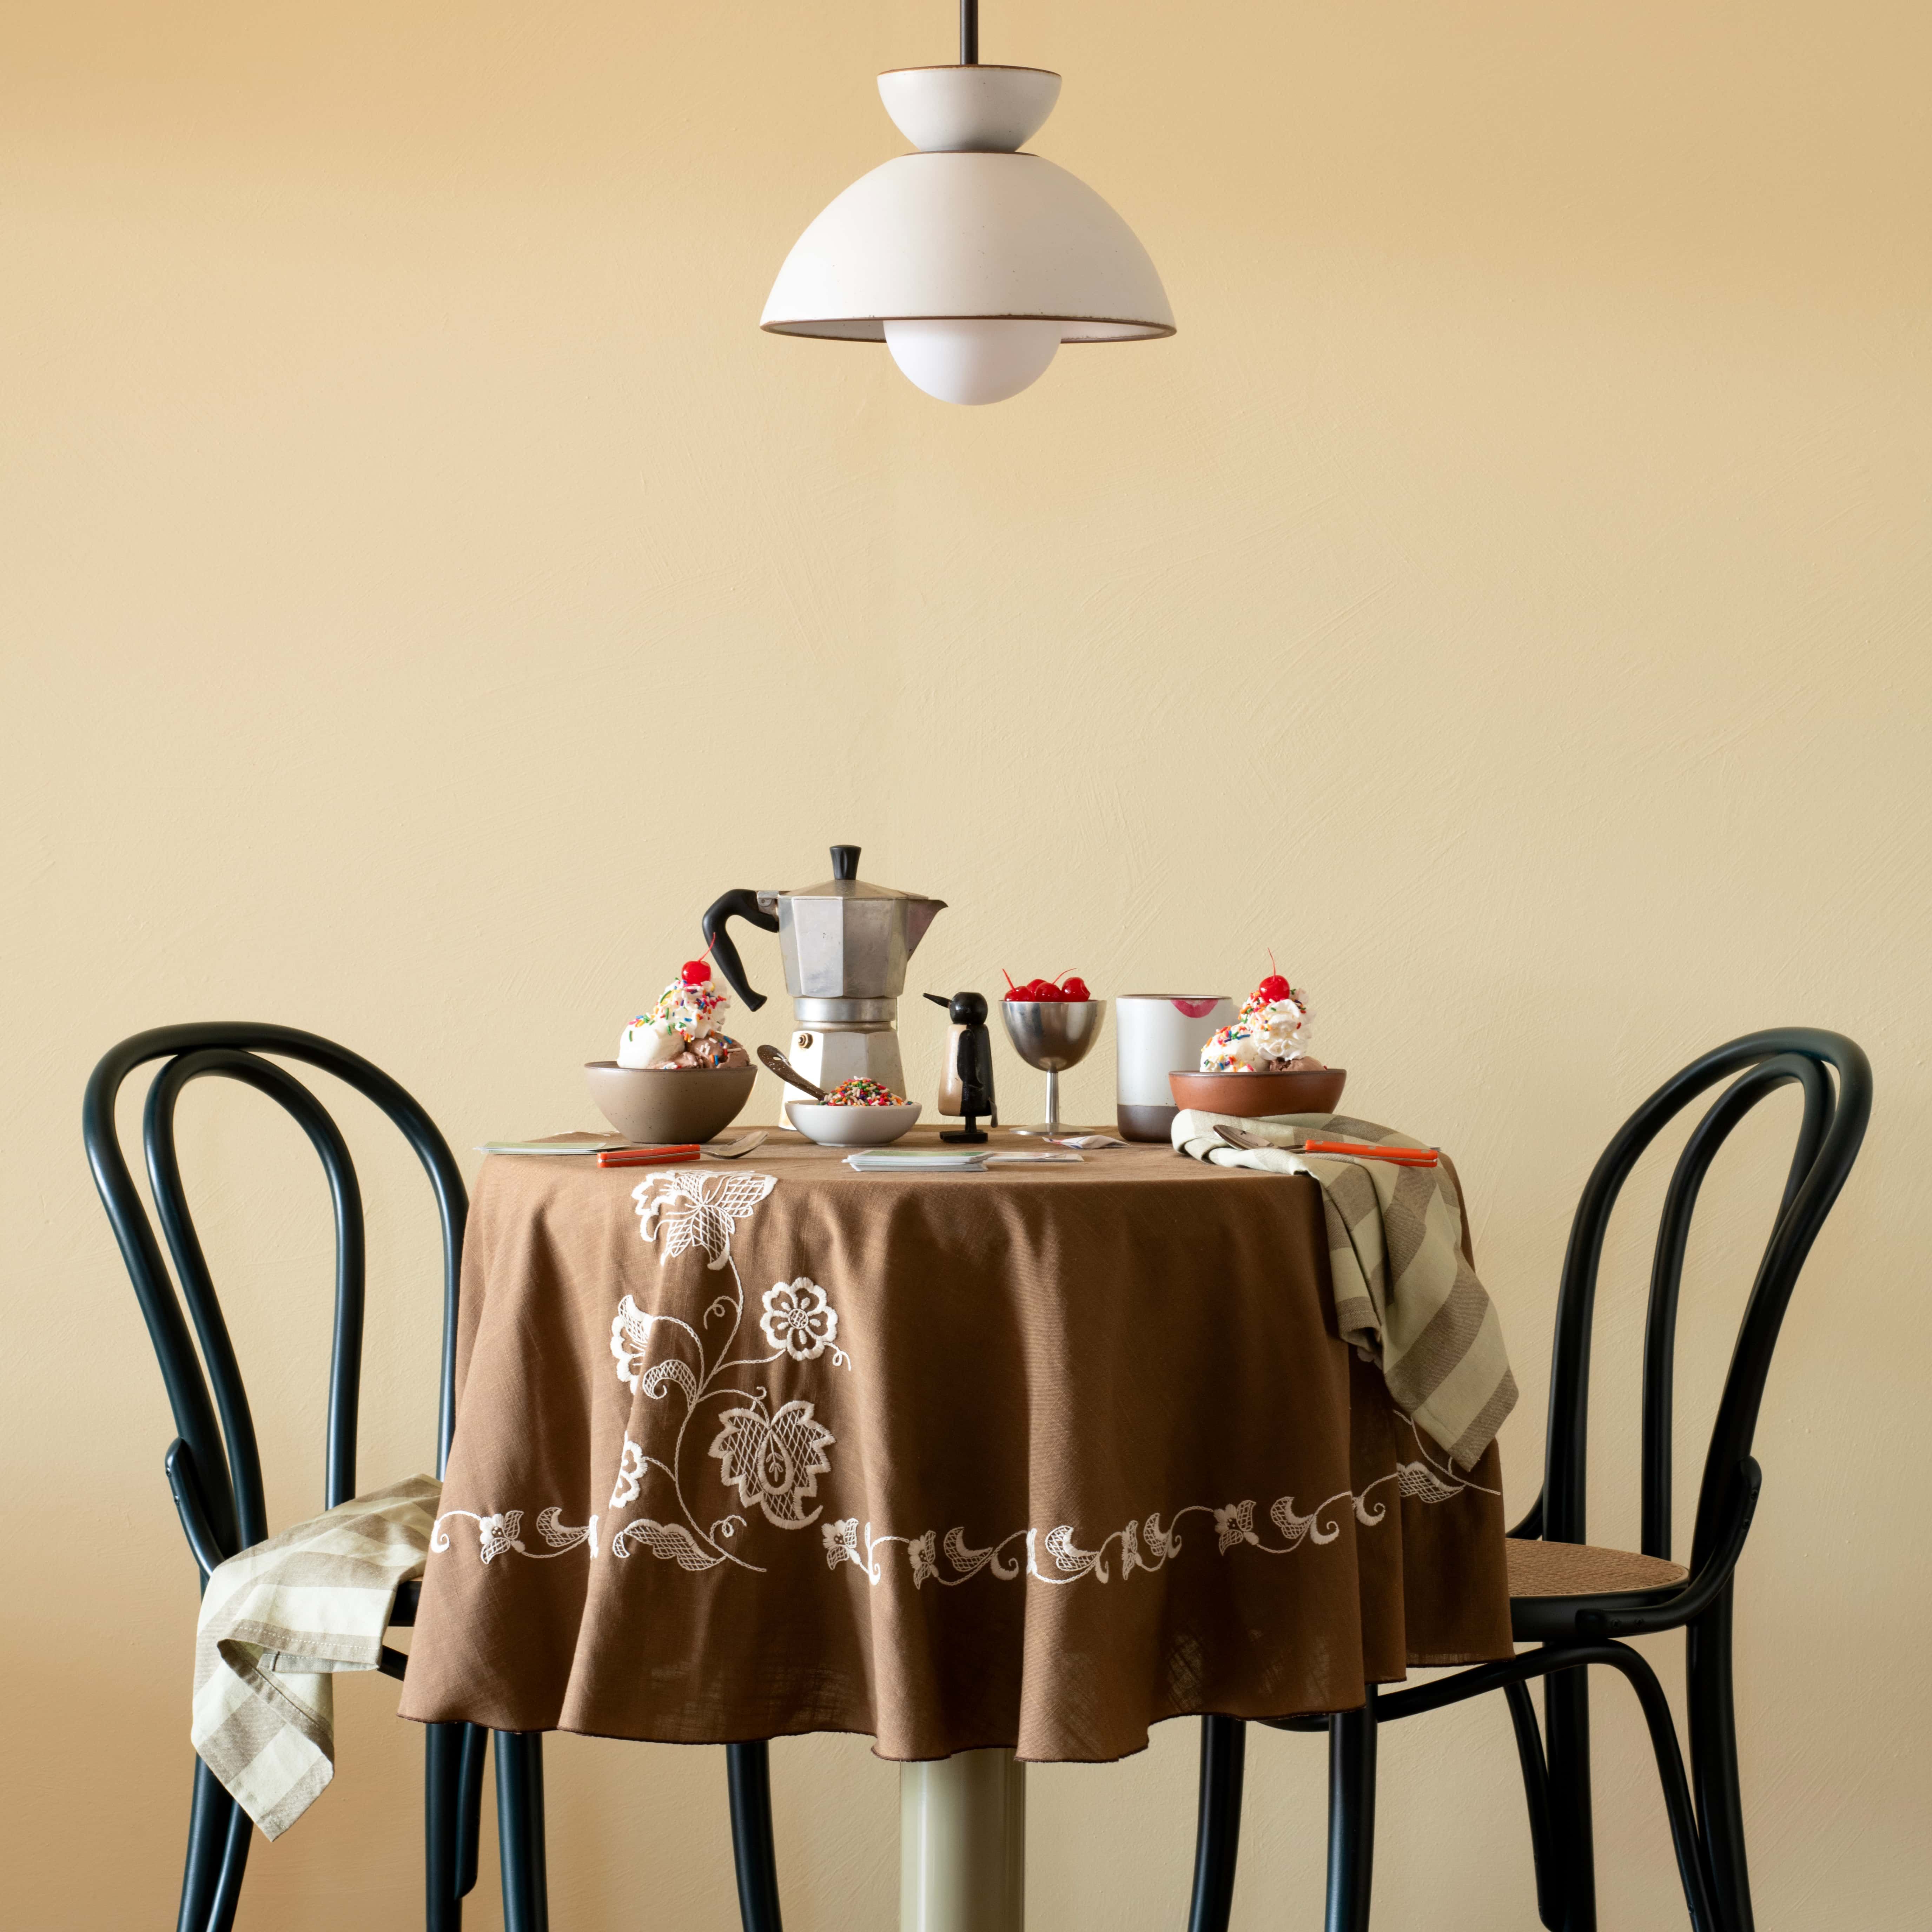 A eggshell light fixture made from East Fork bowls above a table with a tablecloths, espresso pot, and several bowls